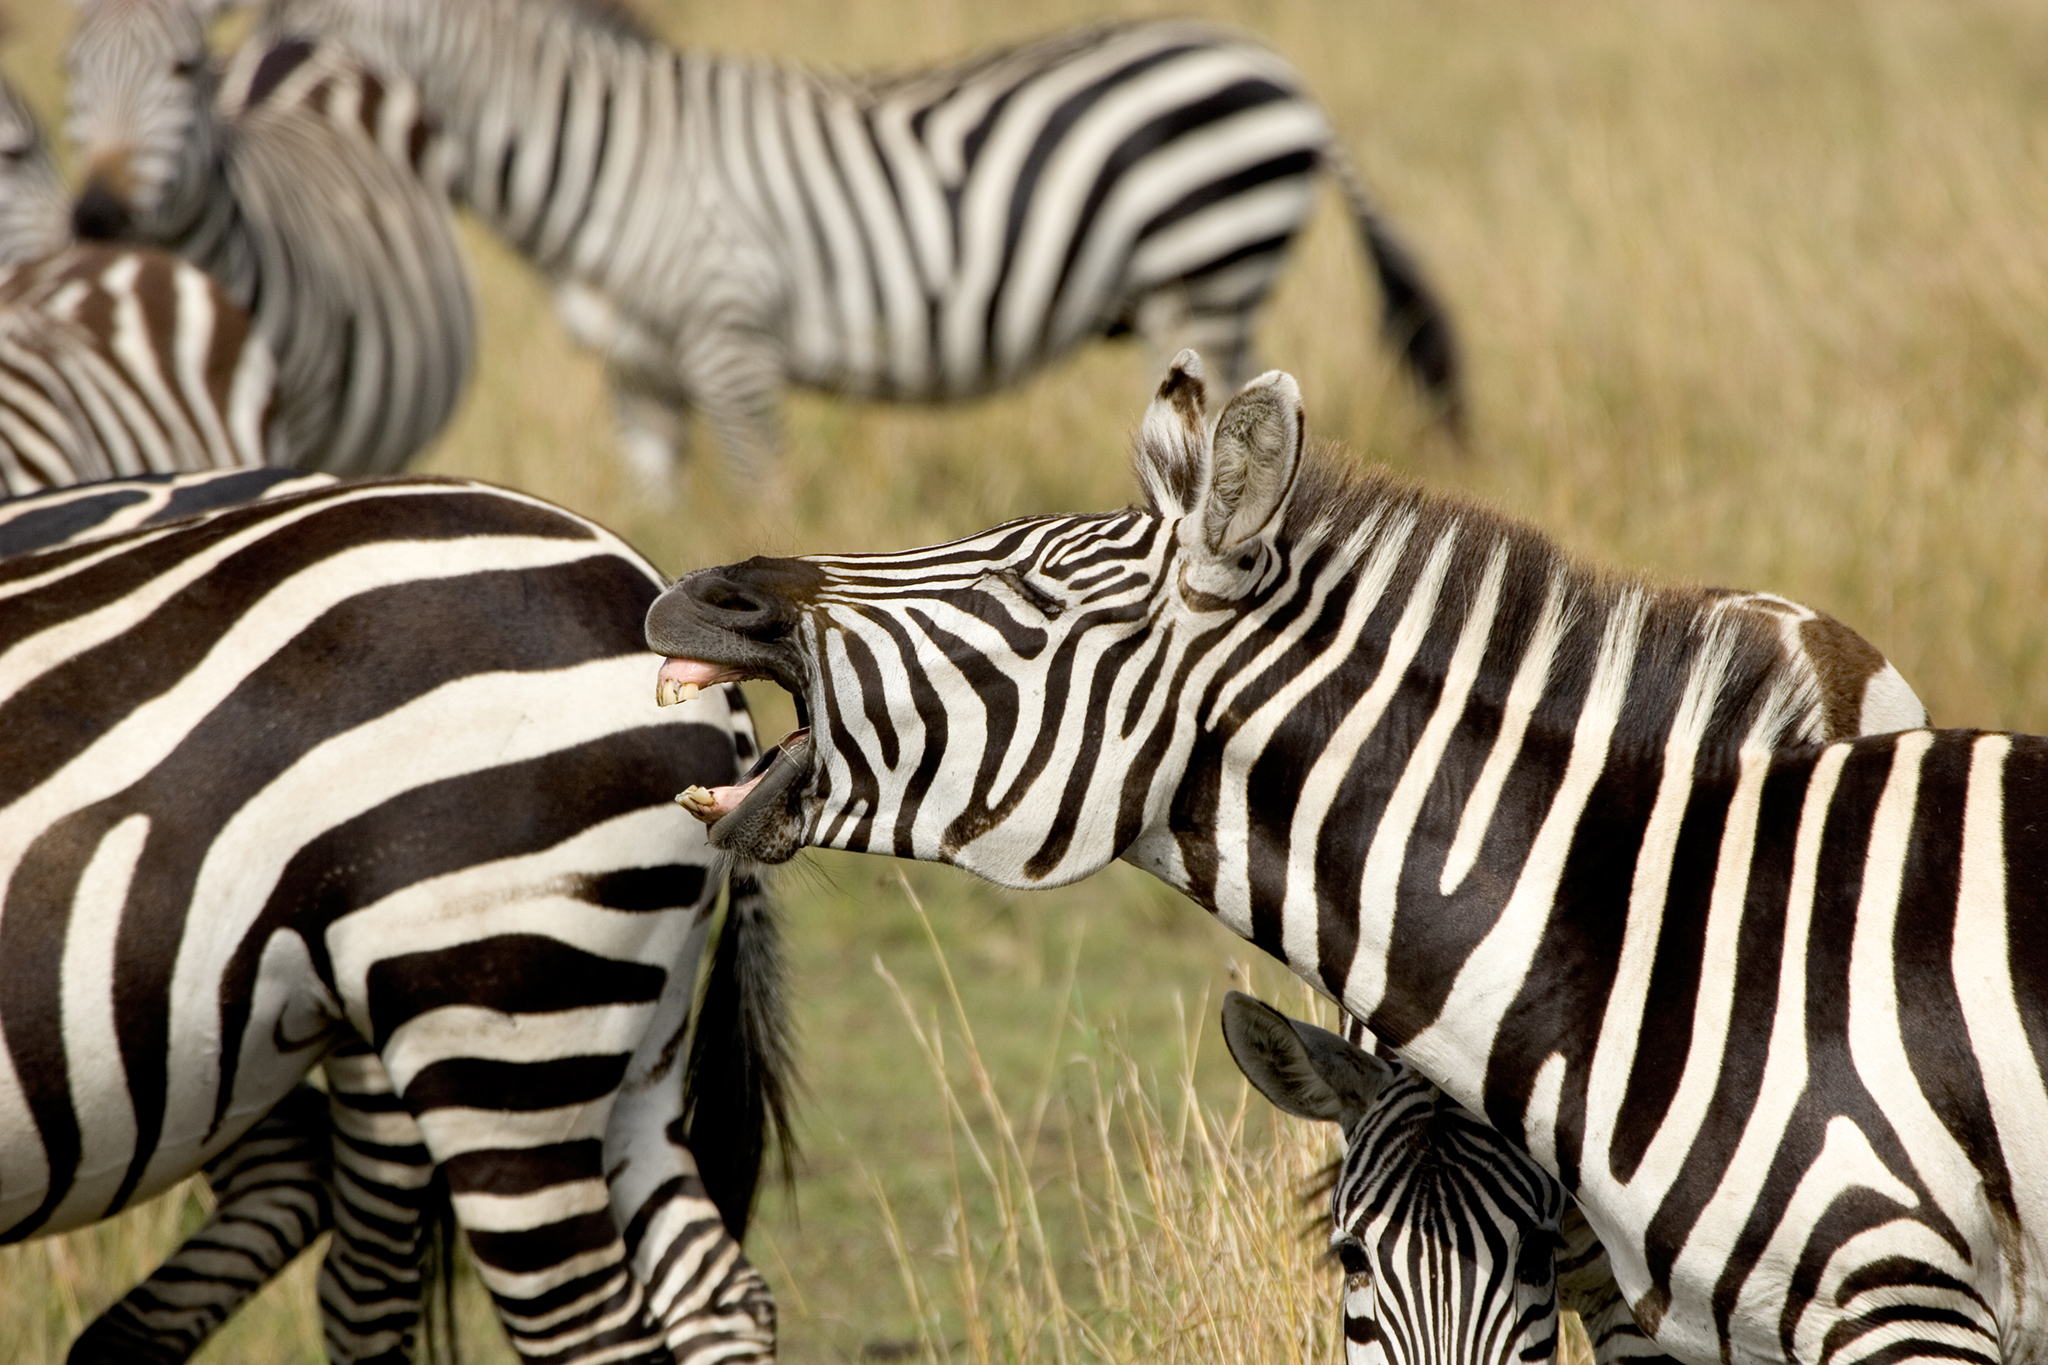 Why Do Zebras Have Stripes? New Study Makes Temperature Connection